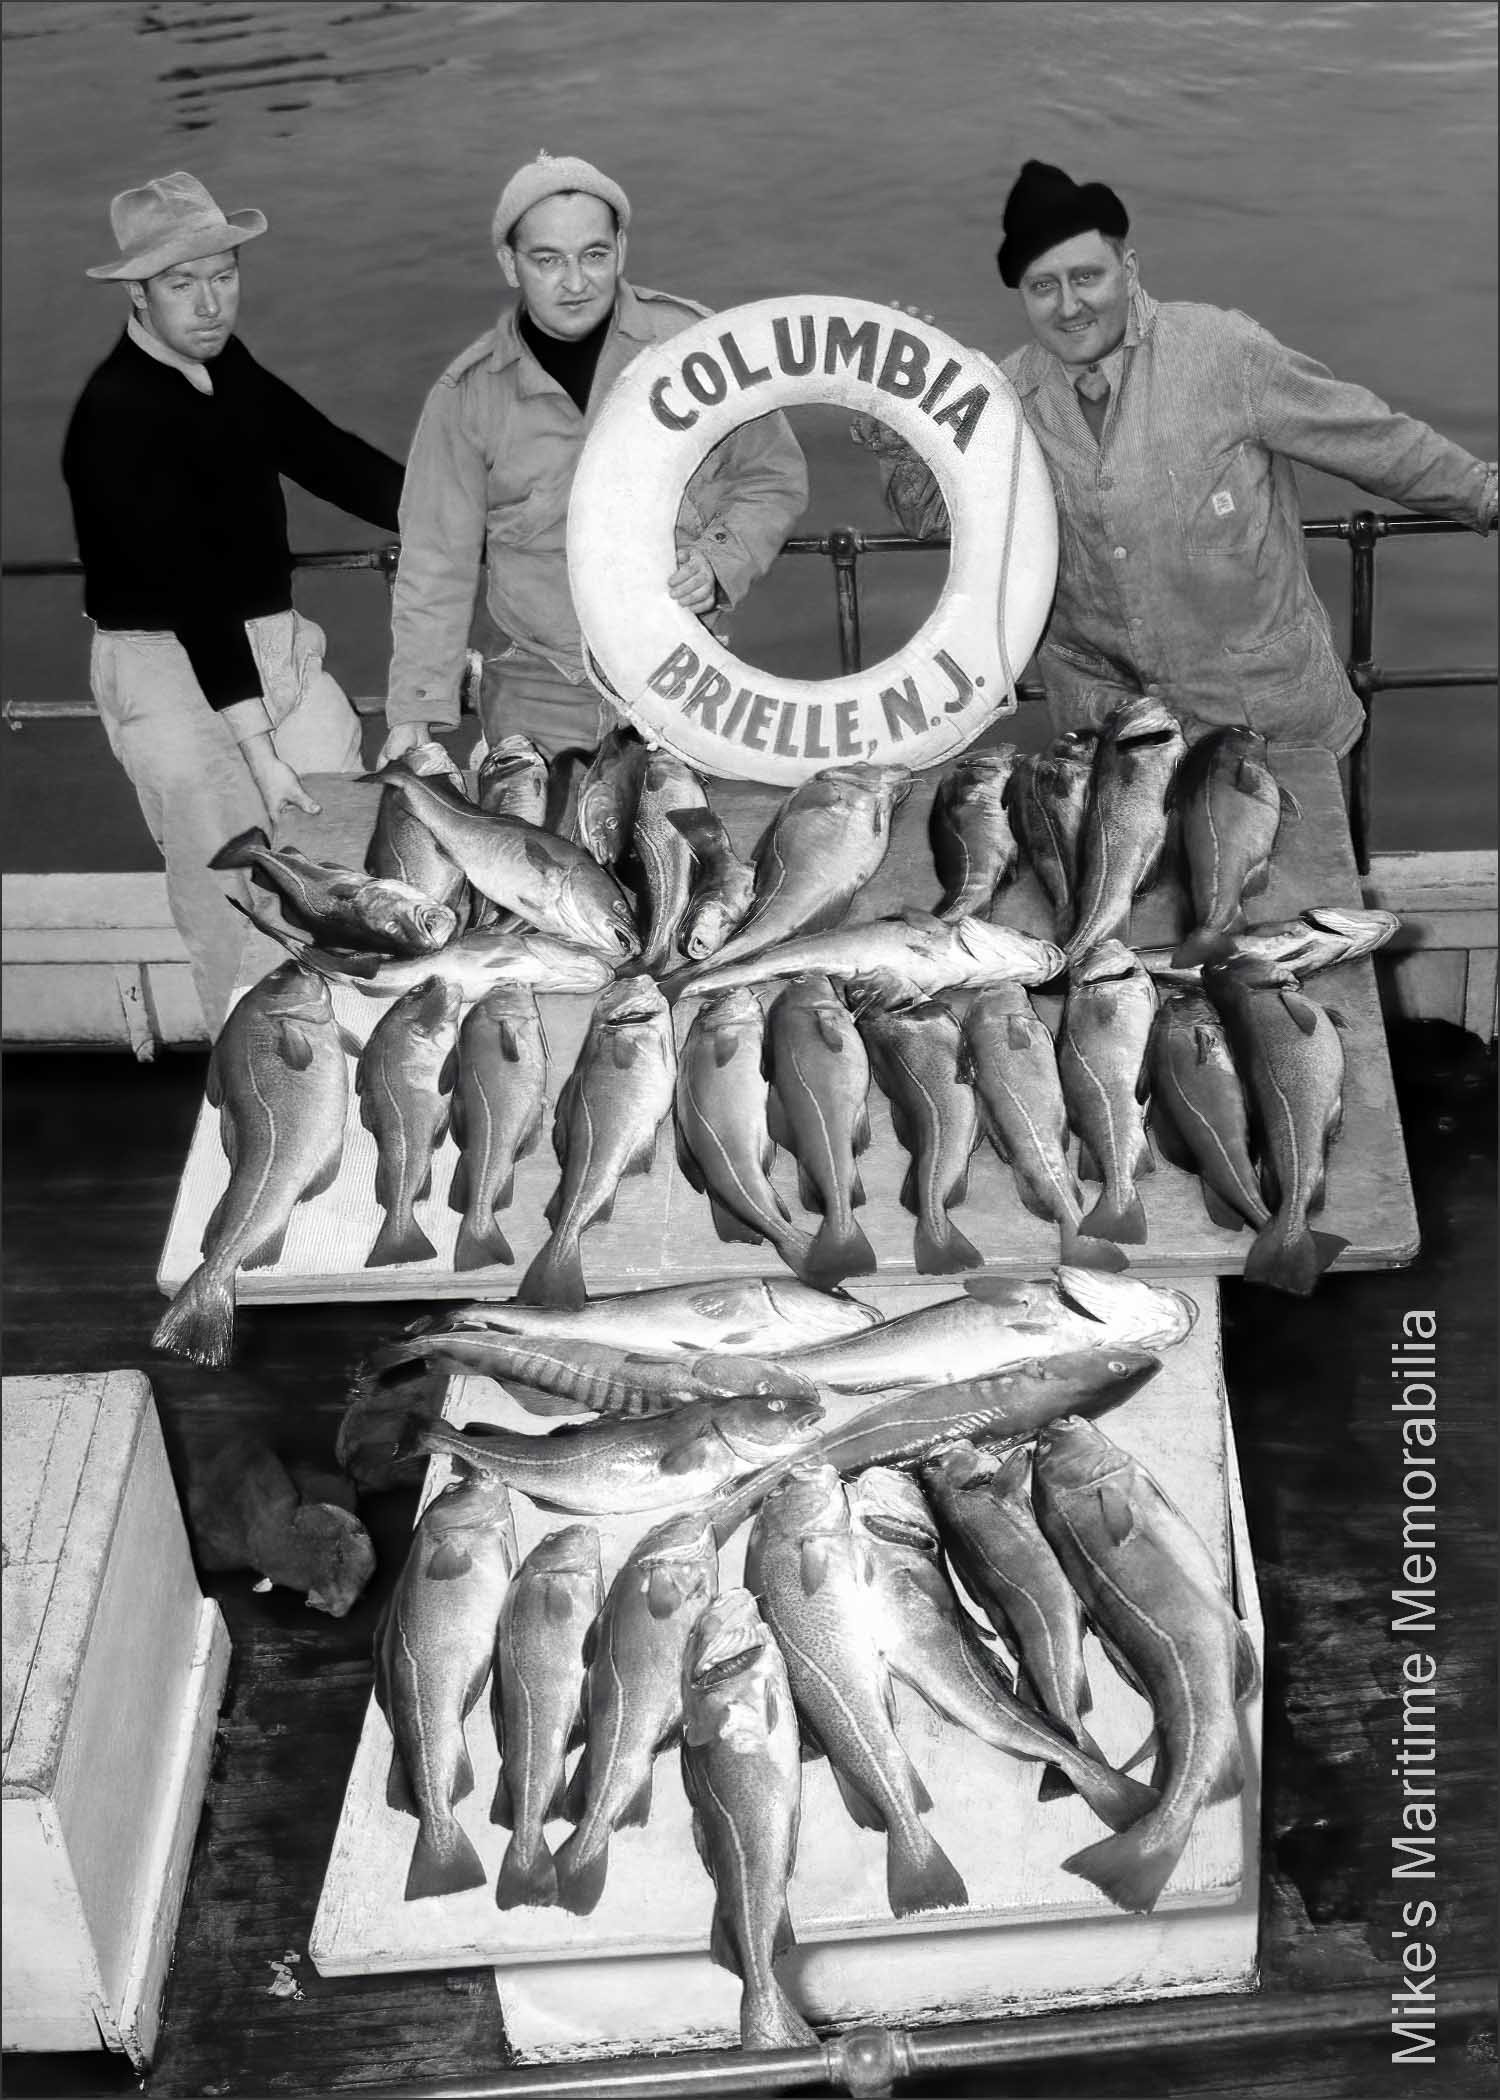 COLUMBIA, Brielle, NJ – 1946 "COLUMBIA" Cod catch circa 1946. Shown sporting a fine catch after a day of fishing are from left to right, Captain Jack Bogan and passengers Frank Strezeski from Clifton, NJ and Father Martin Piasecki pastor of Our Lady of Czestochowa church in Jersey City, NJ. An F.W. Tupper, Point Pleasant, NJ photograph.